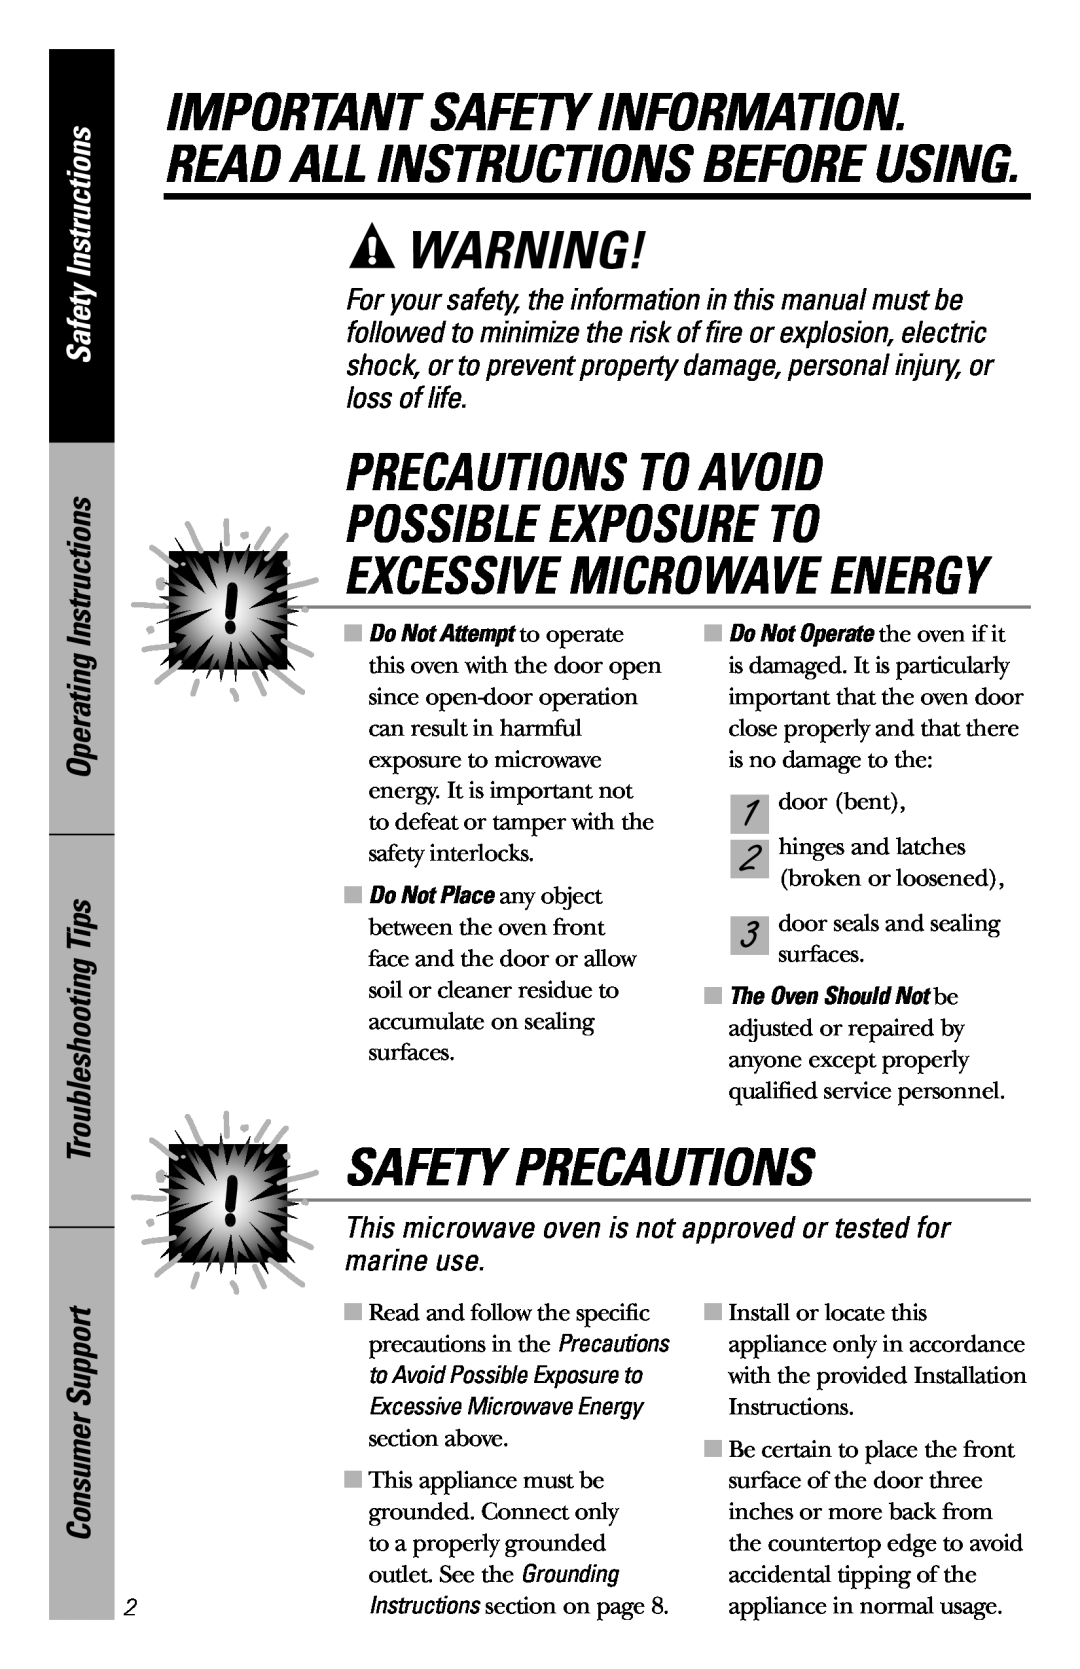 GE 164D3370P211 Precautions To Avoid, Safety Precautions, Important Safety Information. Read All Instructions Before Using 